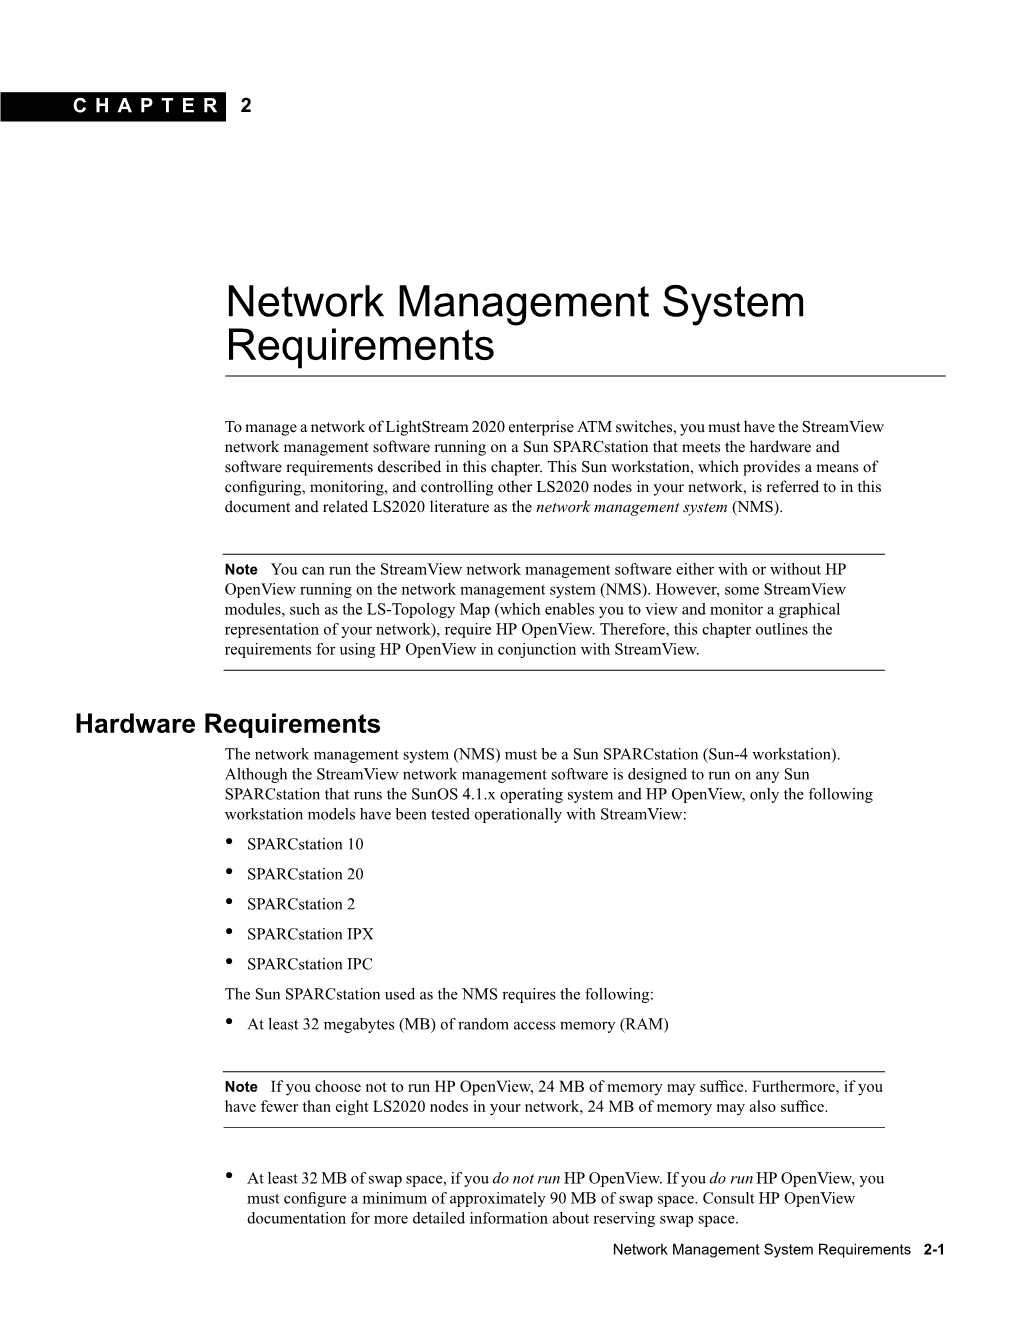 Network Management System Requirements